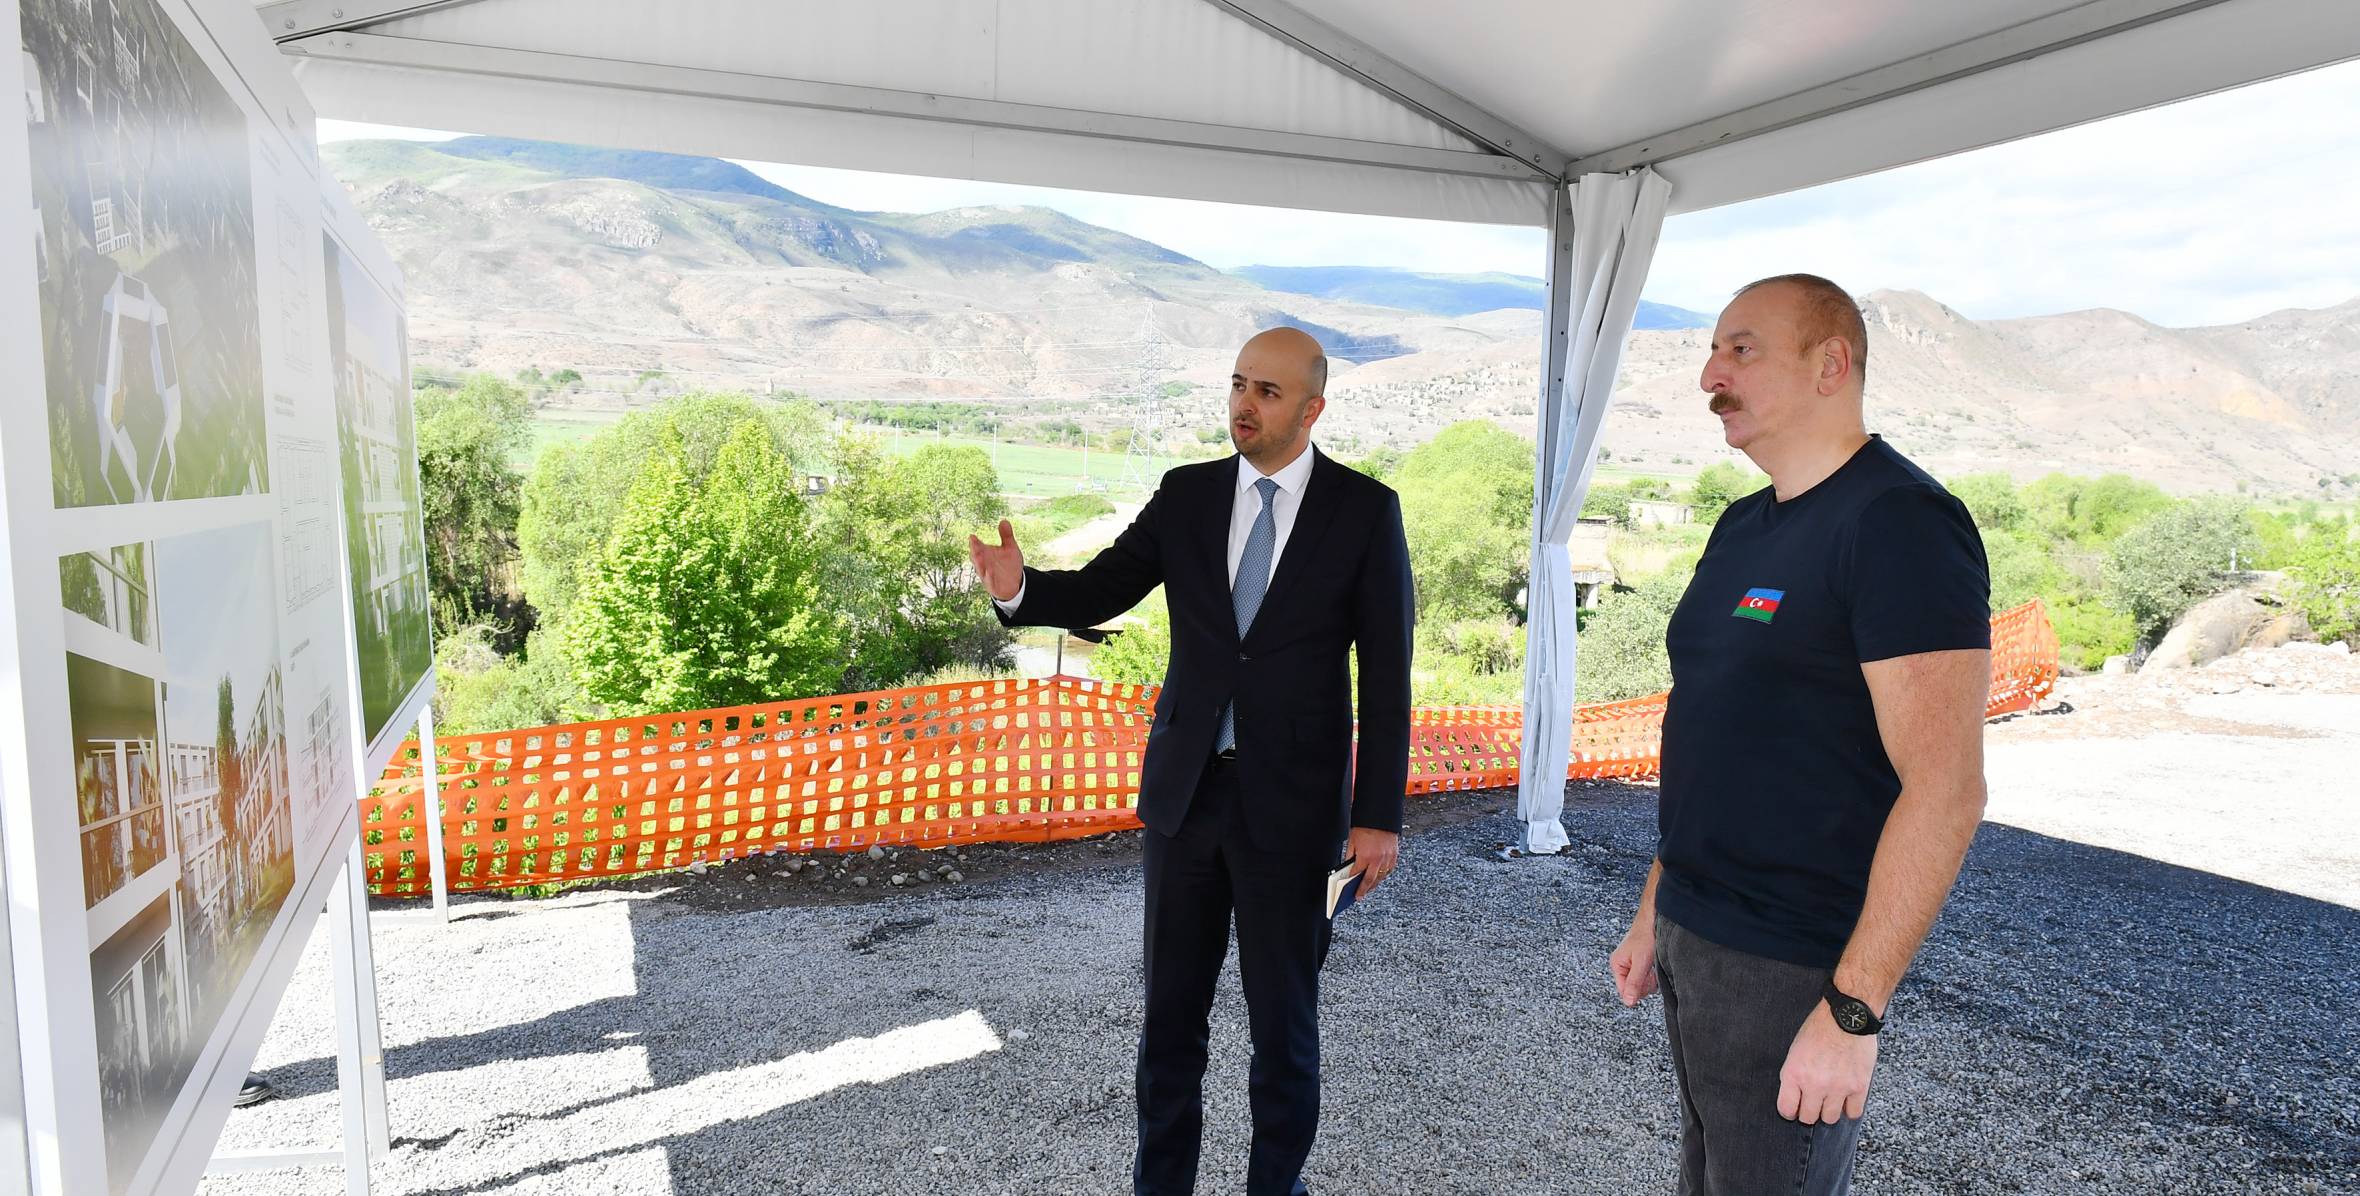 Ilham Aliyev has attended a groundbreaking ceremony for the 1st residential quarter in the city of Gubadli